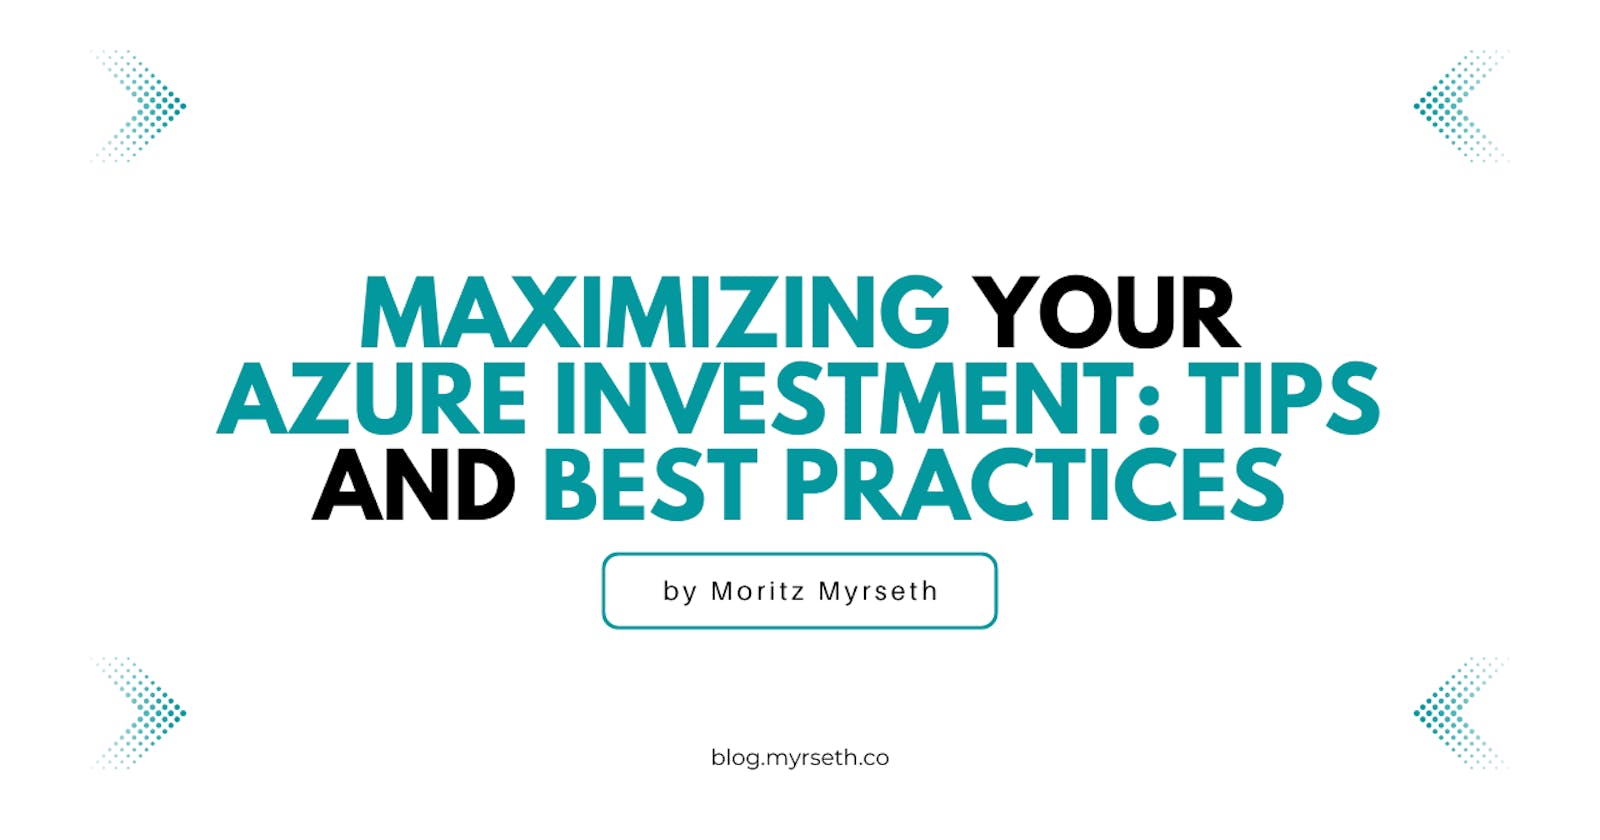 Maximizing Your Azure Investment: Tips and Best Practices